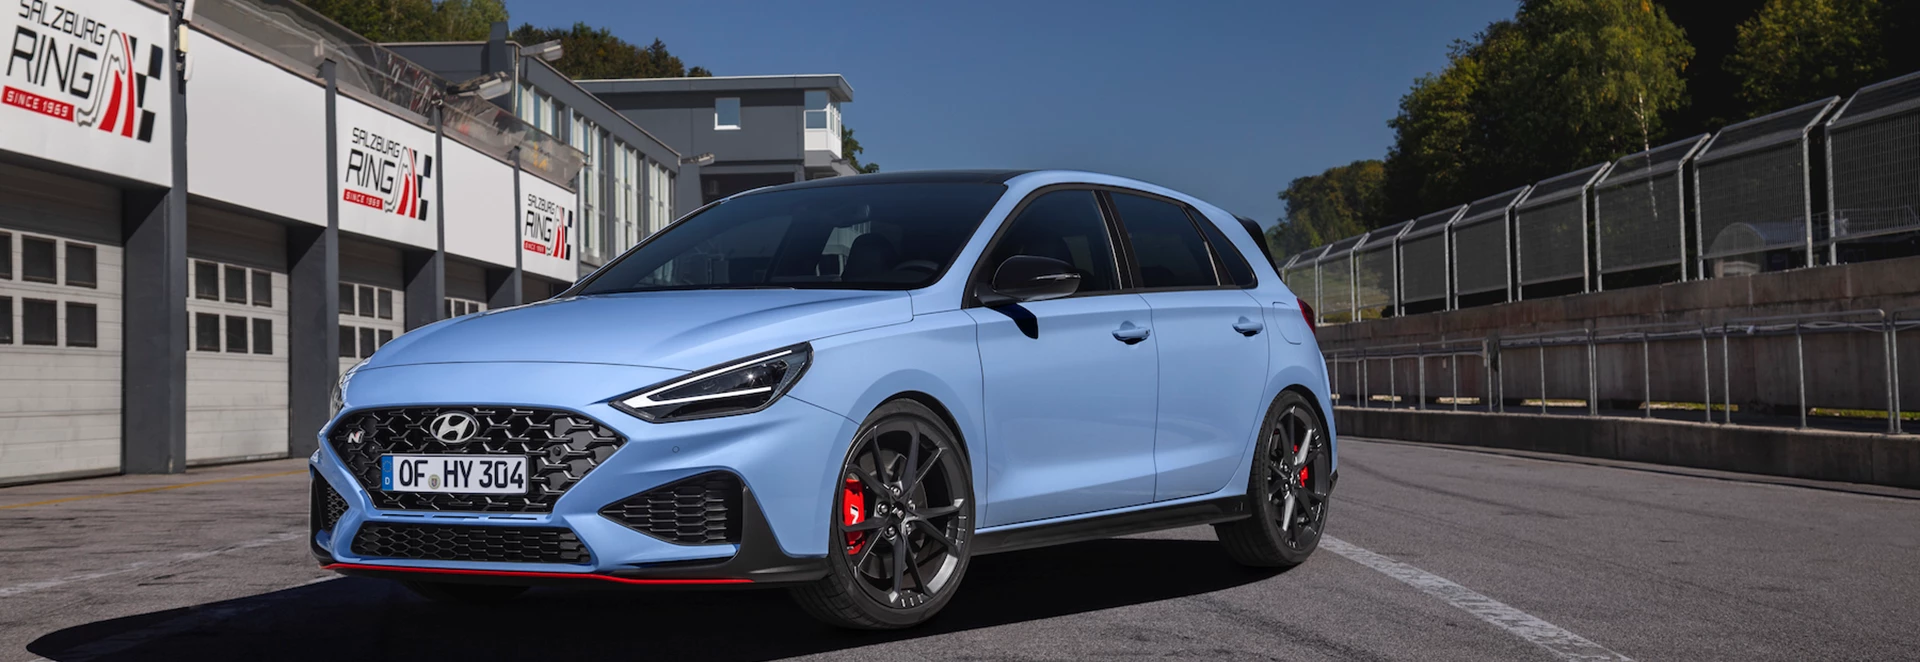 Revised Hyundai i30 N hot hatch revealed with updated styling and new gearbox 